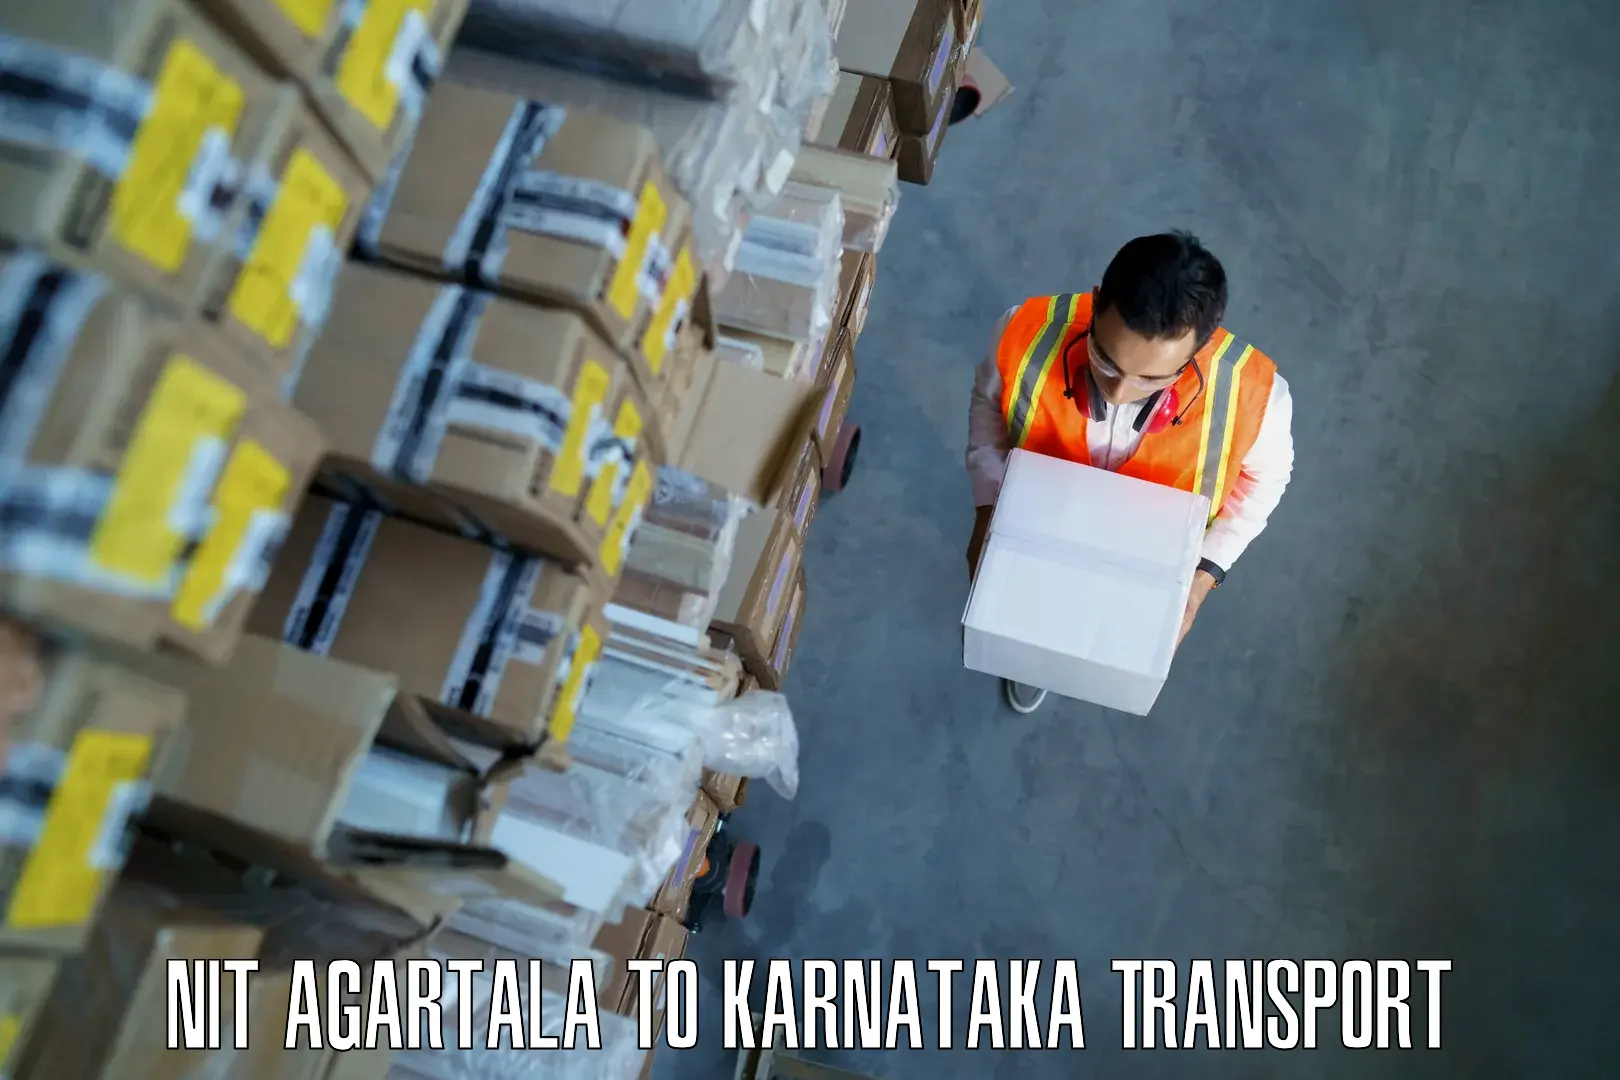 Goods delivery service NIT Agartala to Rona Gadag